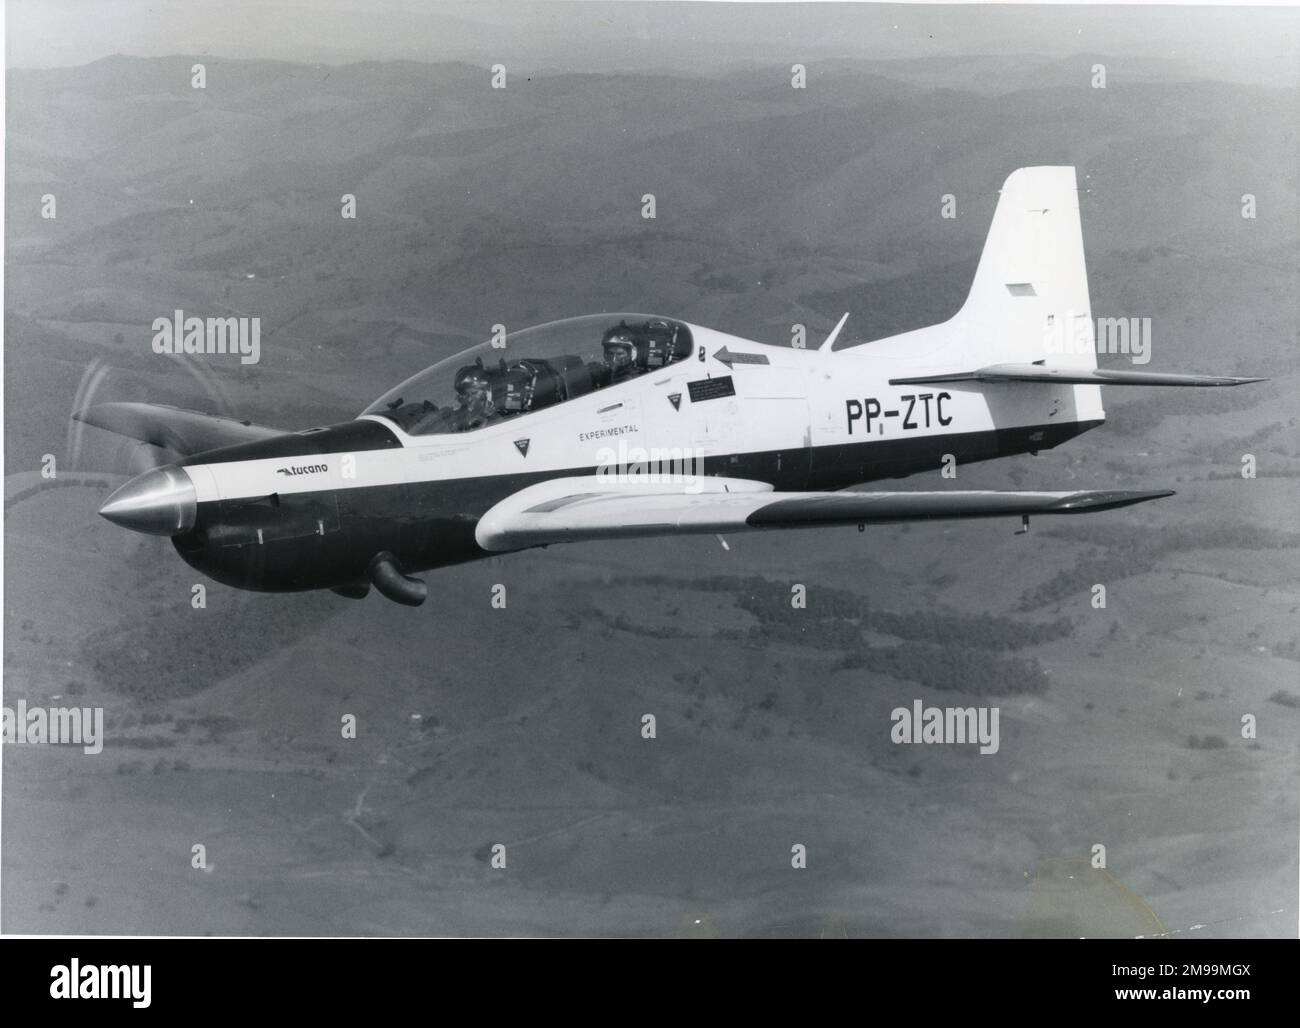 Last Flight in Brazil of First Garrett Powered Embraer/Shorts Tucano Prototype (PP-ZTC), 21 Mar 1986. Embraer S.A. is a Brazilian aerospace conglomerate that produces commercial, military, executive and agricultural aircraft and provides aeronautical services. Stock Photo